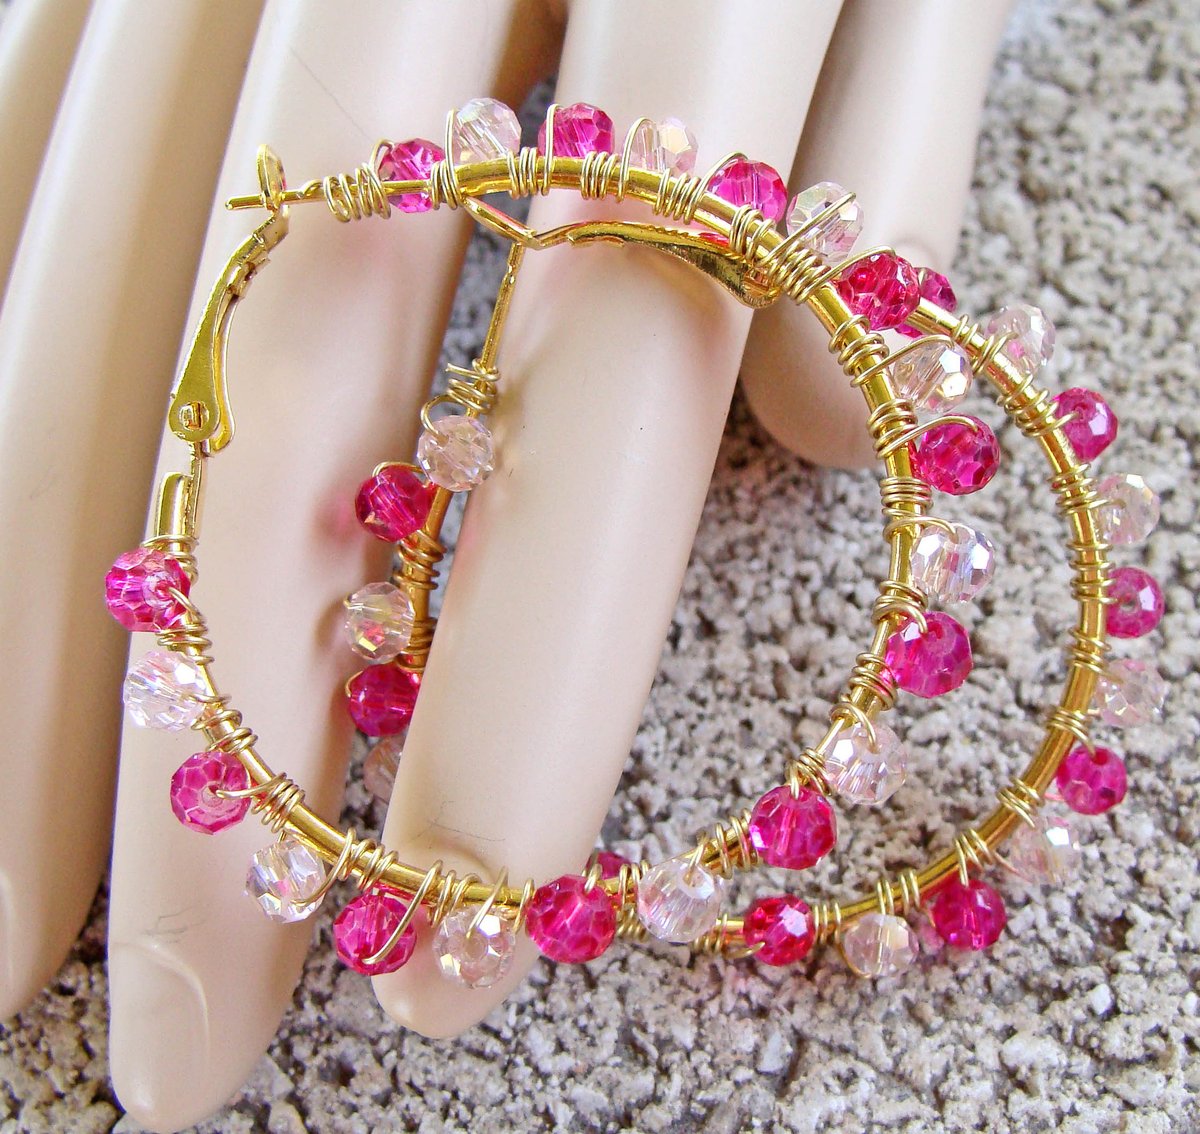 Light and Dark Pink Crystal Wire Wrapped Gold Hoop Earrings: etsy.com/.../light-and-…... #pinkearrings #pinkcrystals #goldearrings #goldhoops #hoops #wirewrappedjewelry #sparkle #bling #Boho # #goldwire #romantic #ValentinesDay #giftsforher #etsyhandmadejewelry #supportsmallbiz